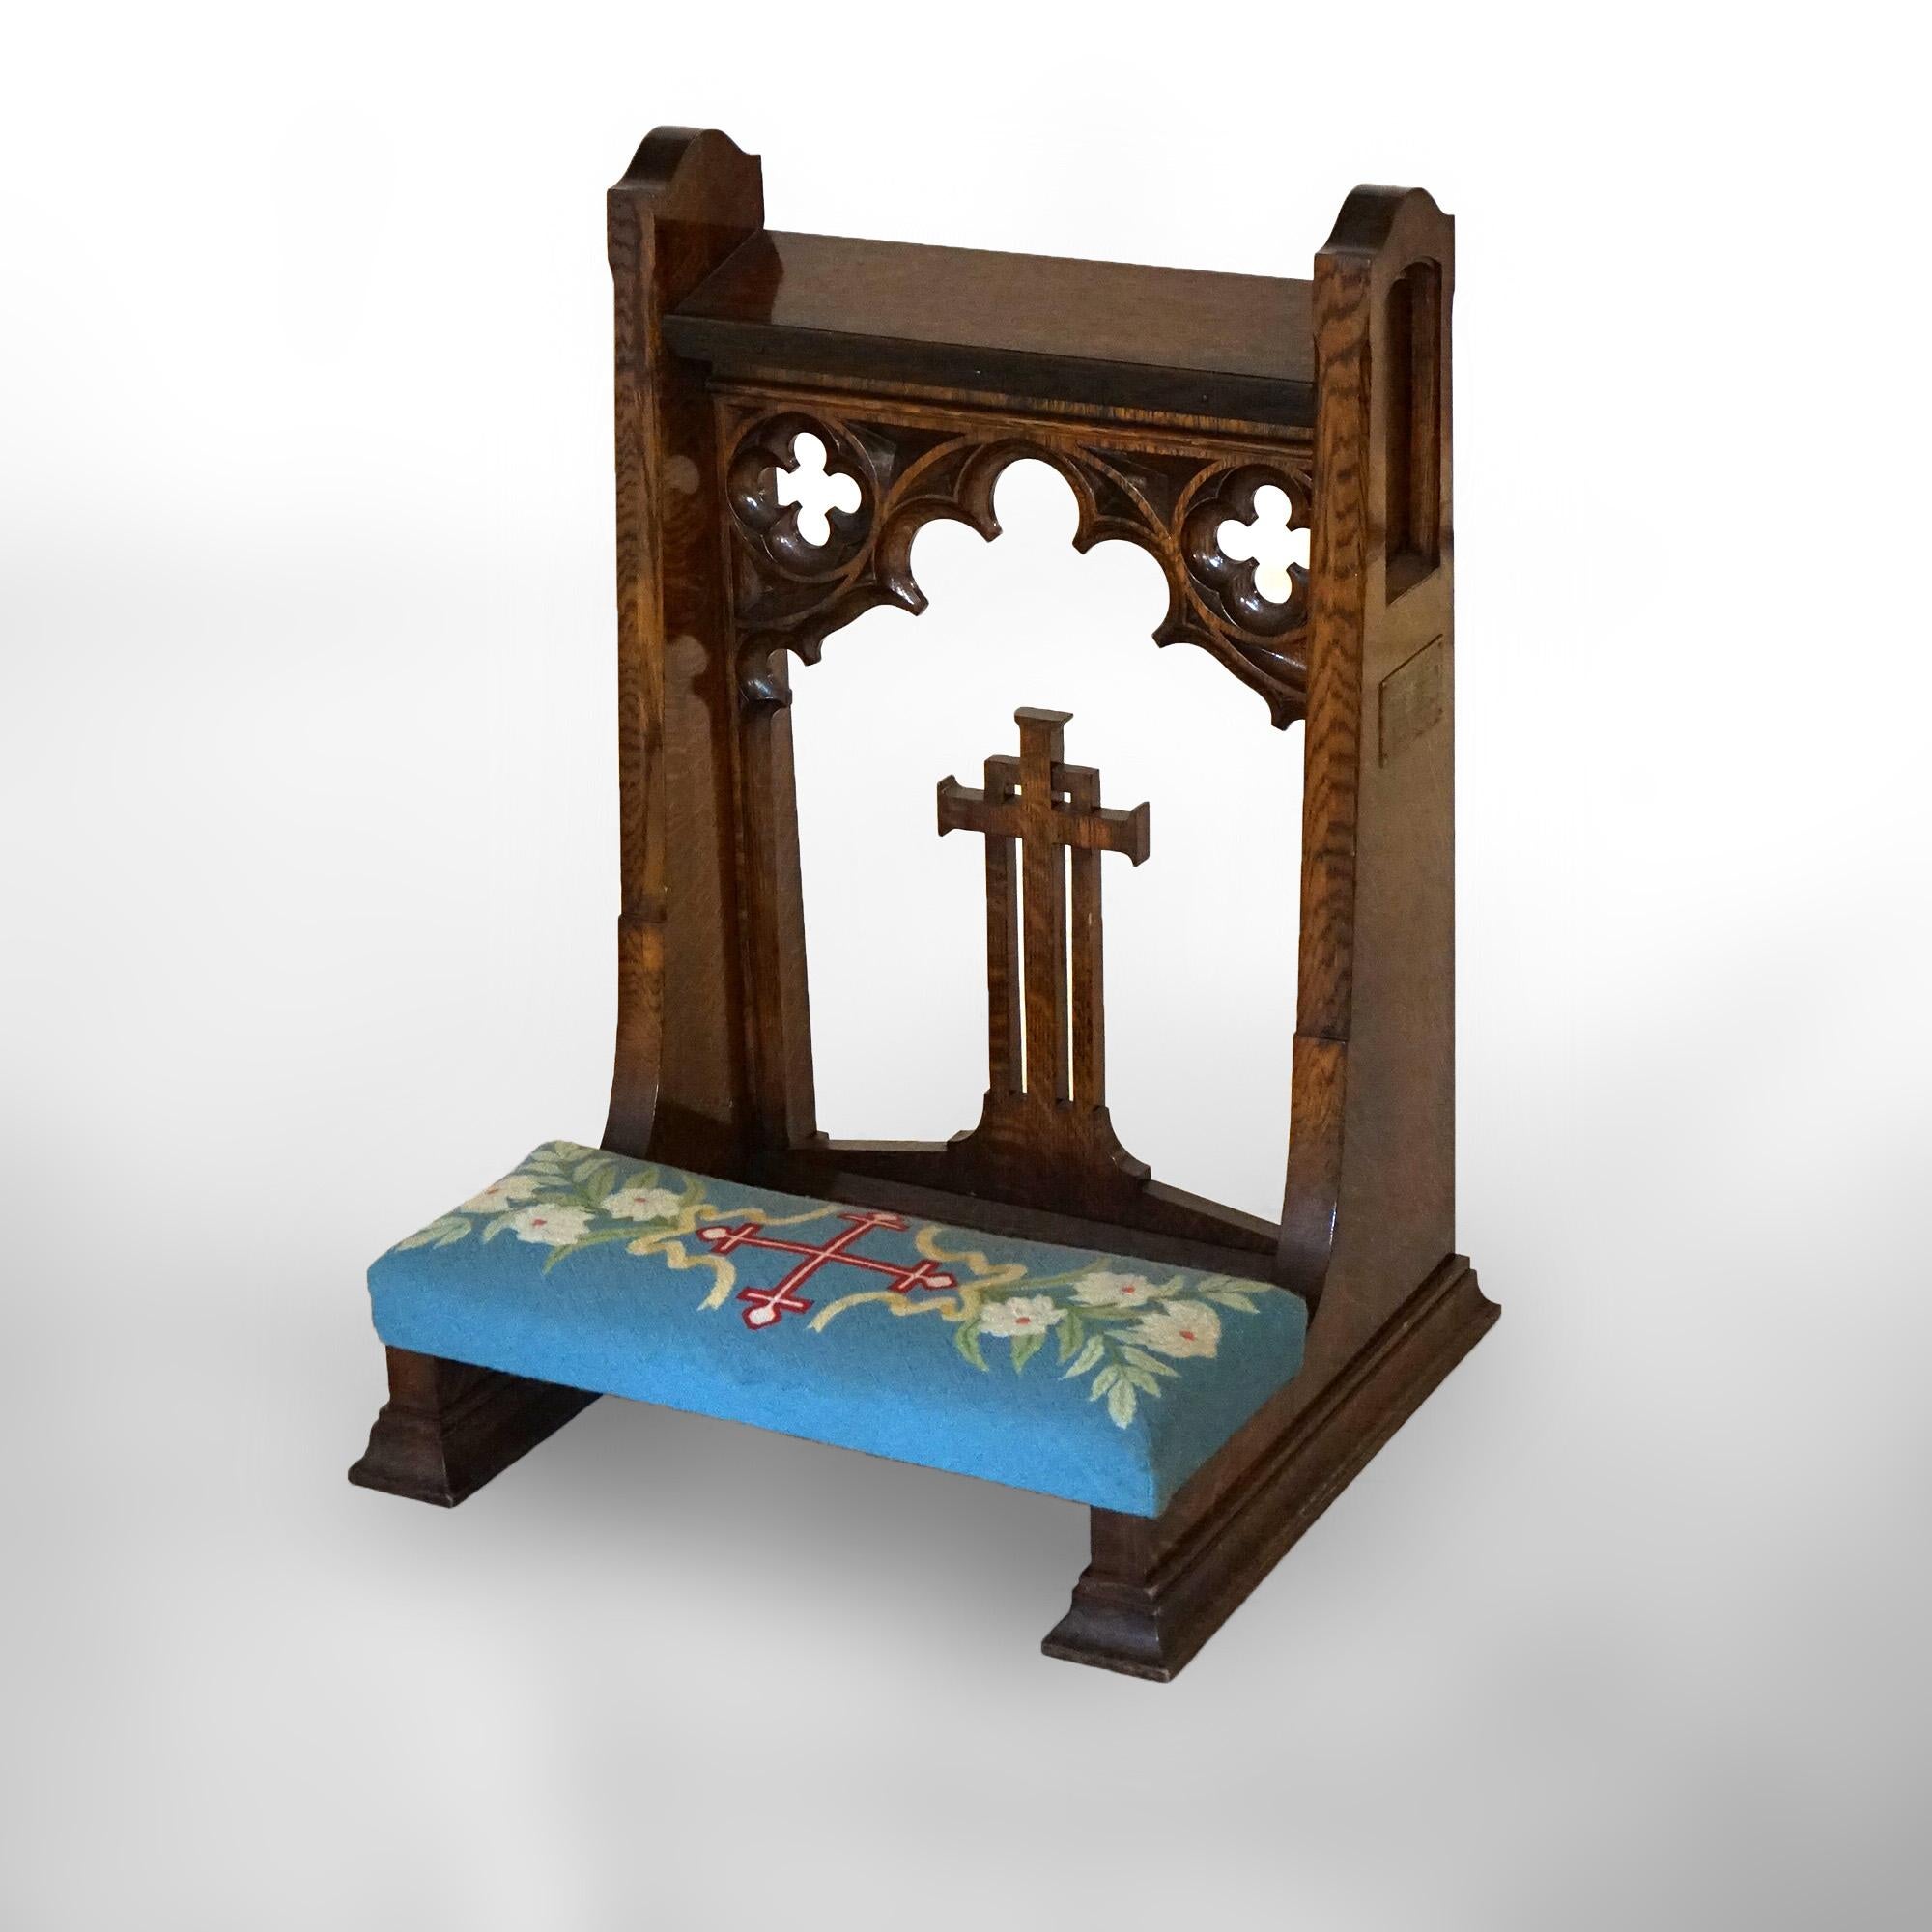 Antique Gothic Revival Carved Oak Kneeling Bench with Floral Needlepoint Seat C1850

Measures- 36''H x 26.25''W x 2''D